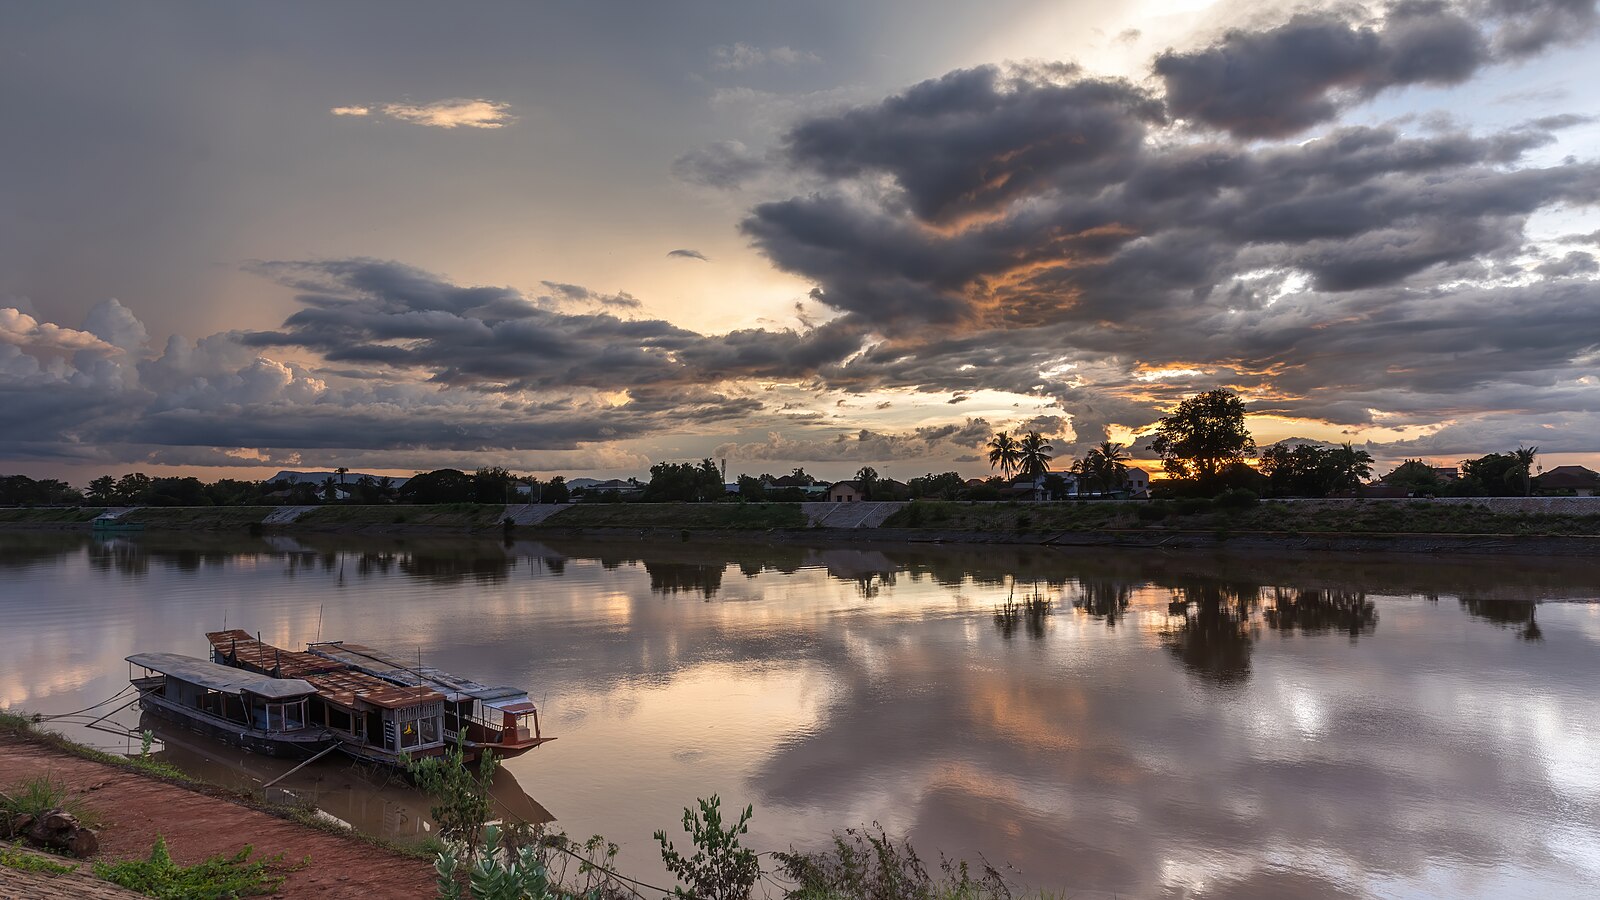 Water reflection of sunset with gray and orange clouds and boats moored to the bank in Pakse Laos